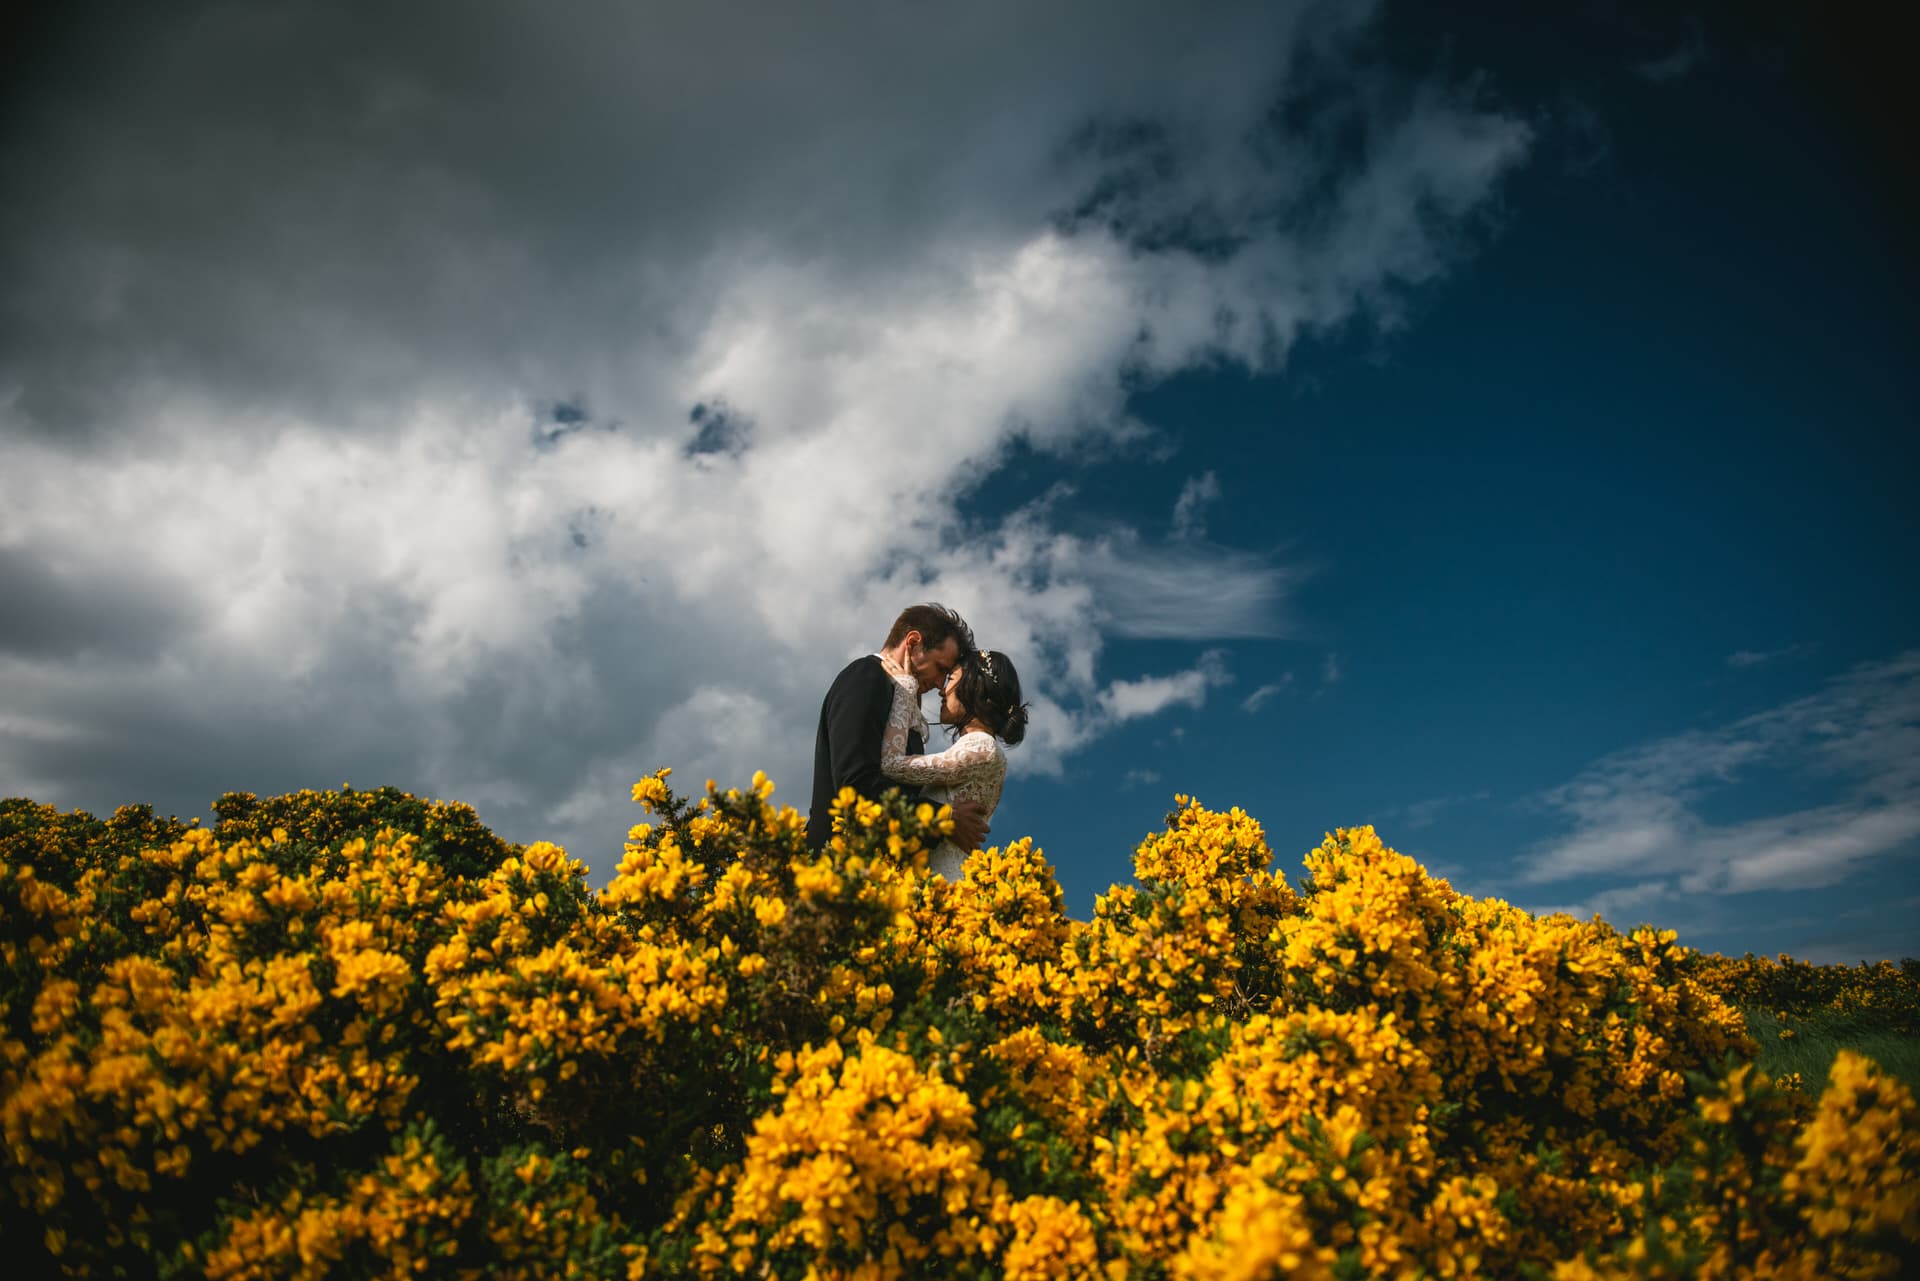 Magical shot of the couple surrounded by wildflowers in a meadow during their Northern Ireland elopement.